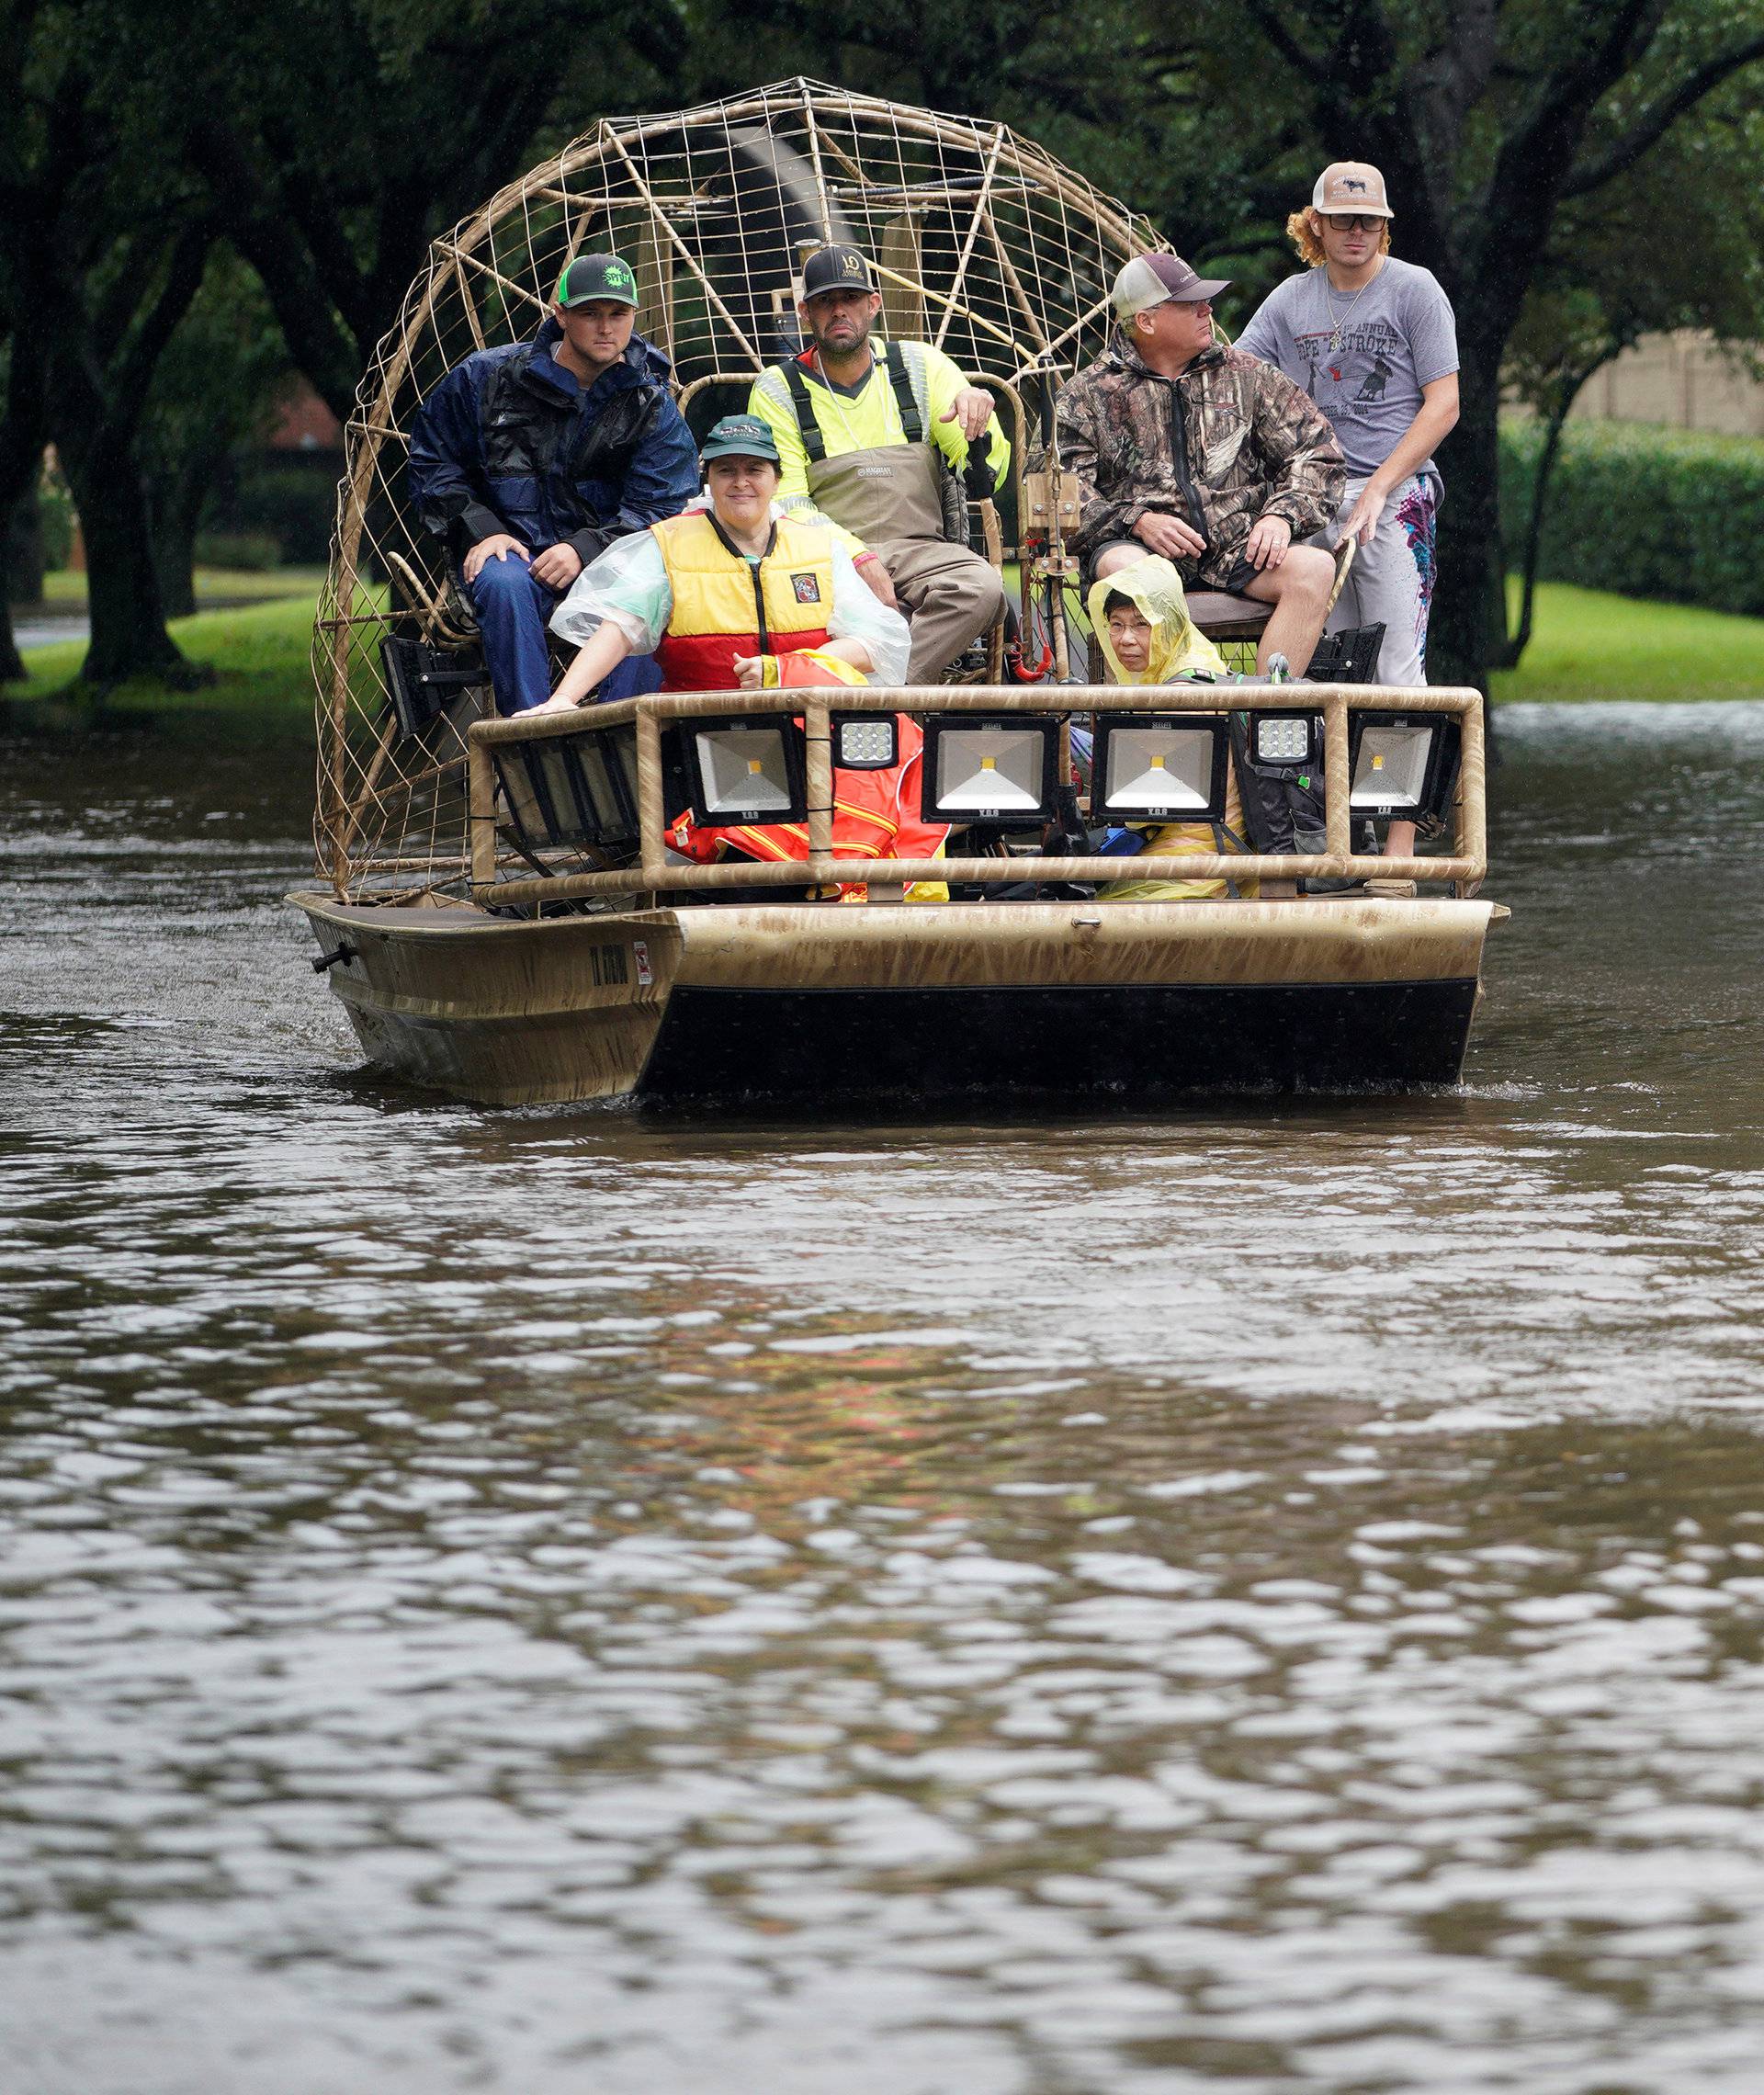 A woman is evacuated by airboat from the Hurricane Harvey floodwaters in Houston